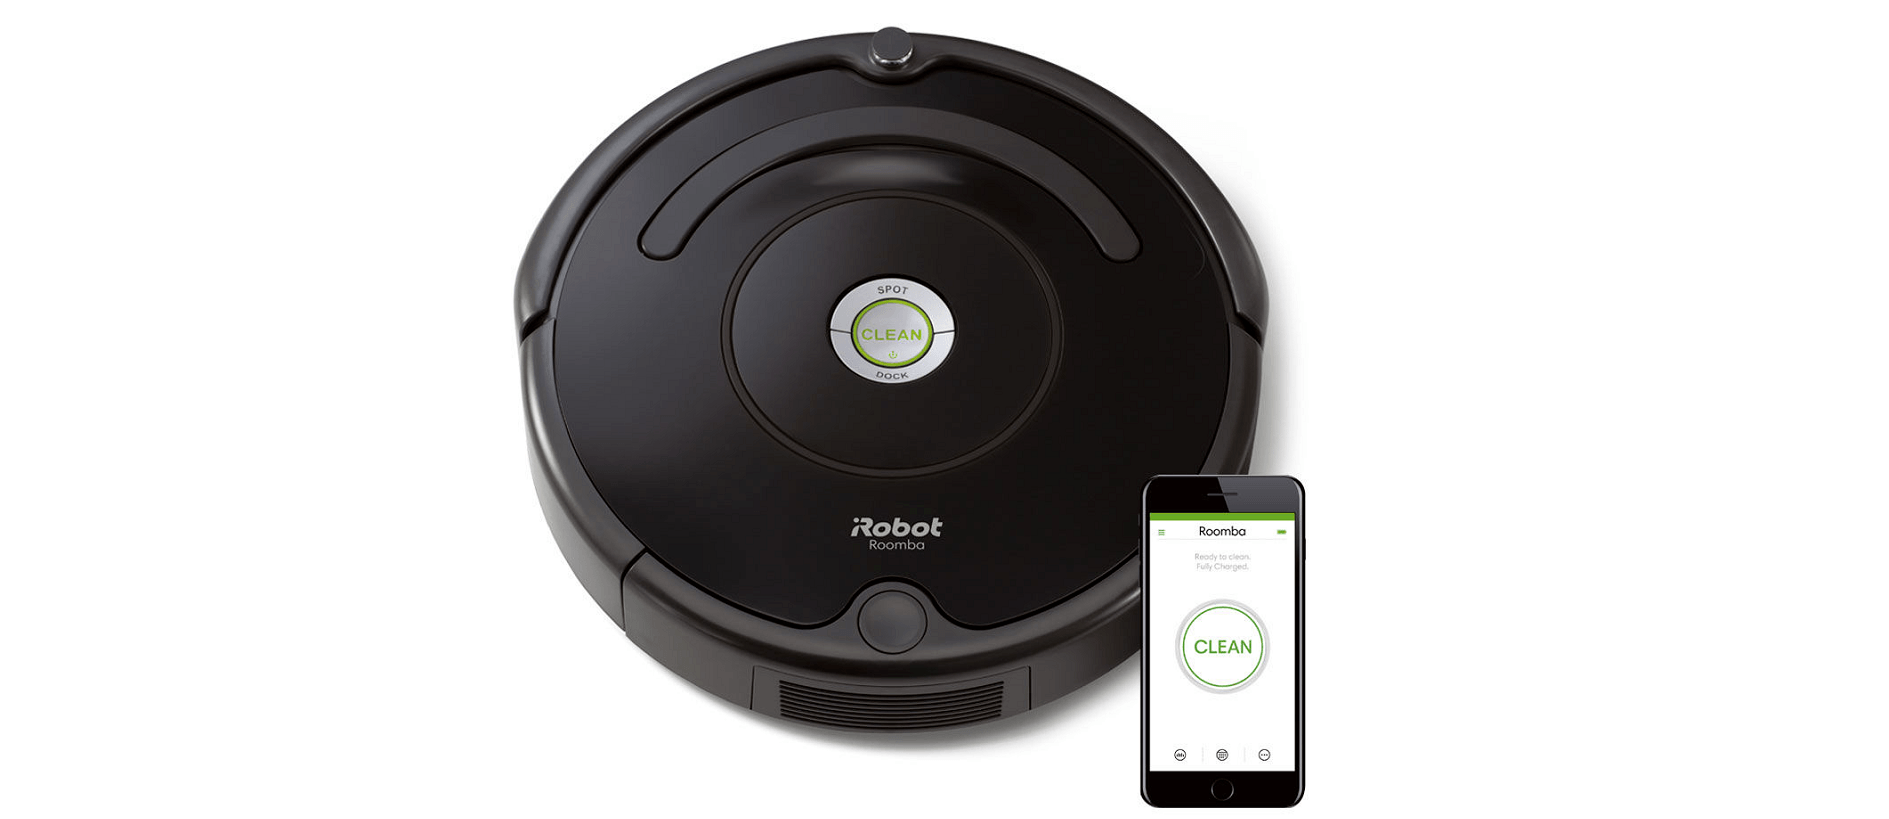 Roomba 675 Review Is This Vacuum It?